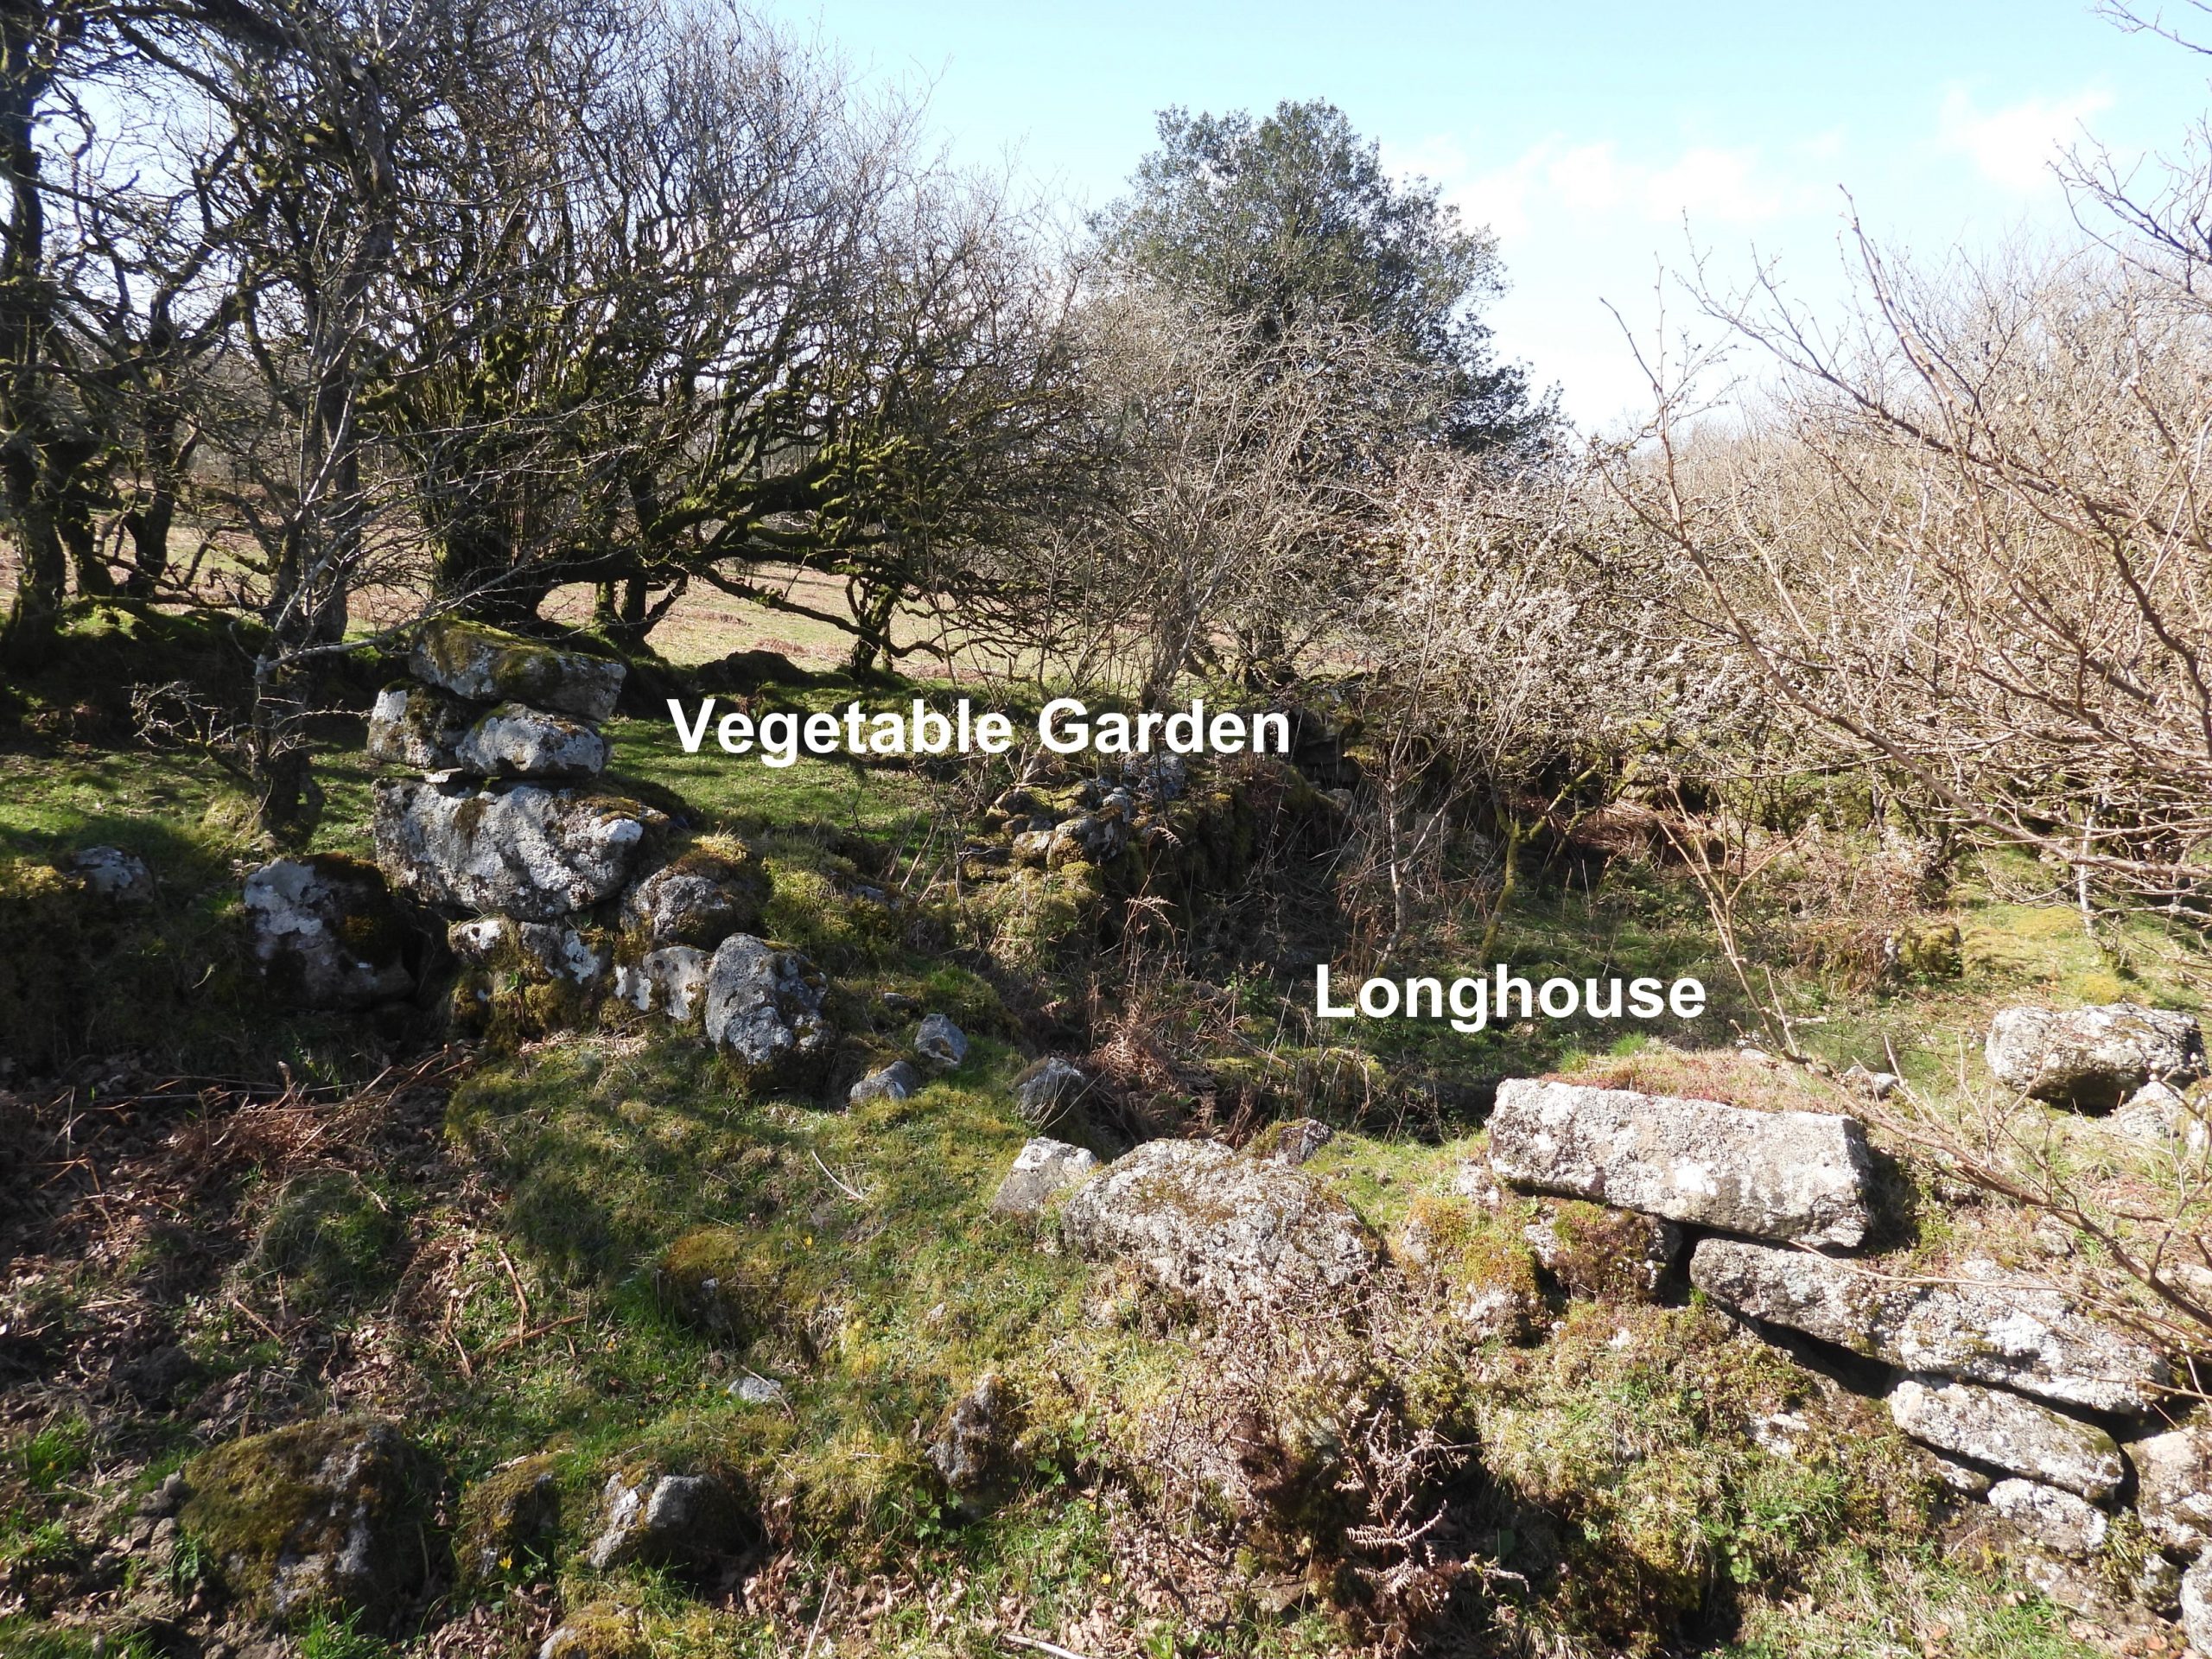 2. Longhouse and Vegetable Garden